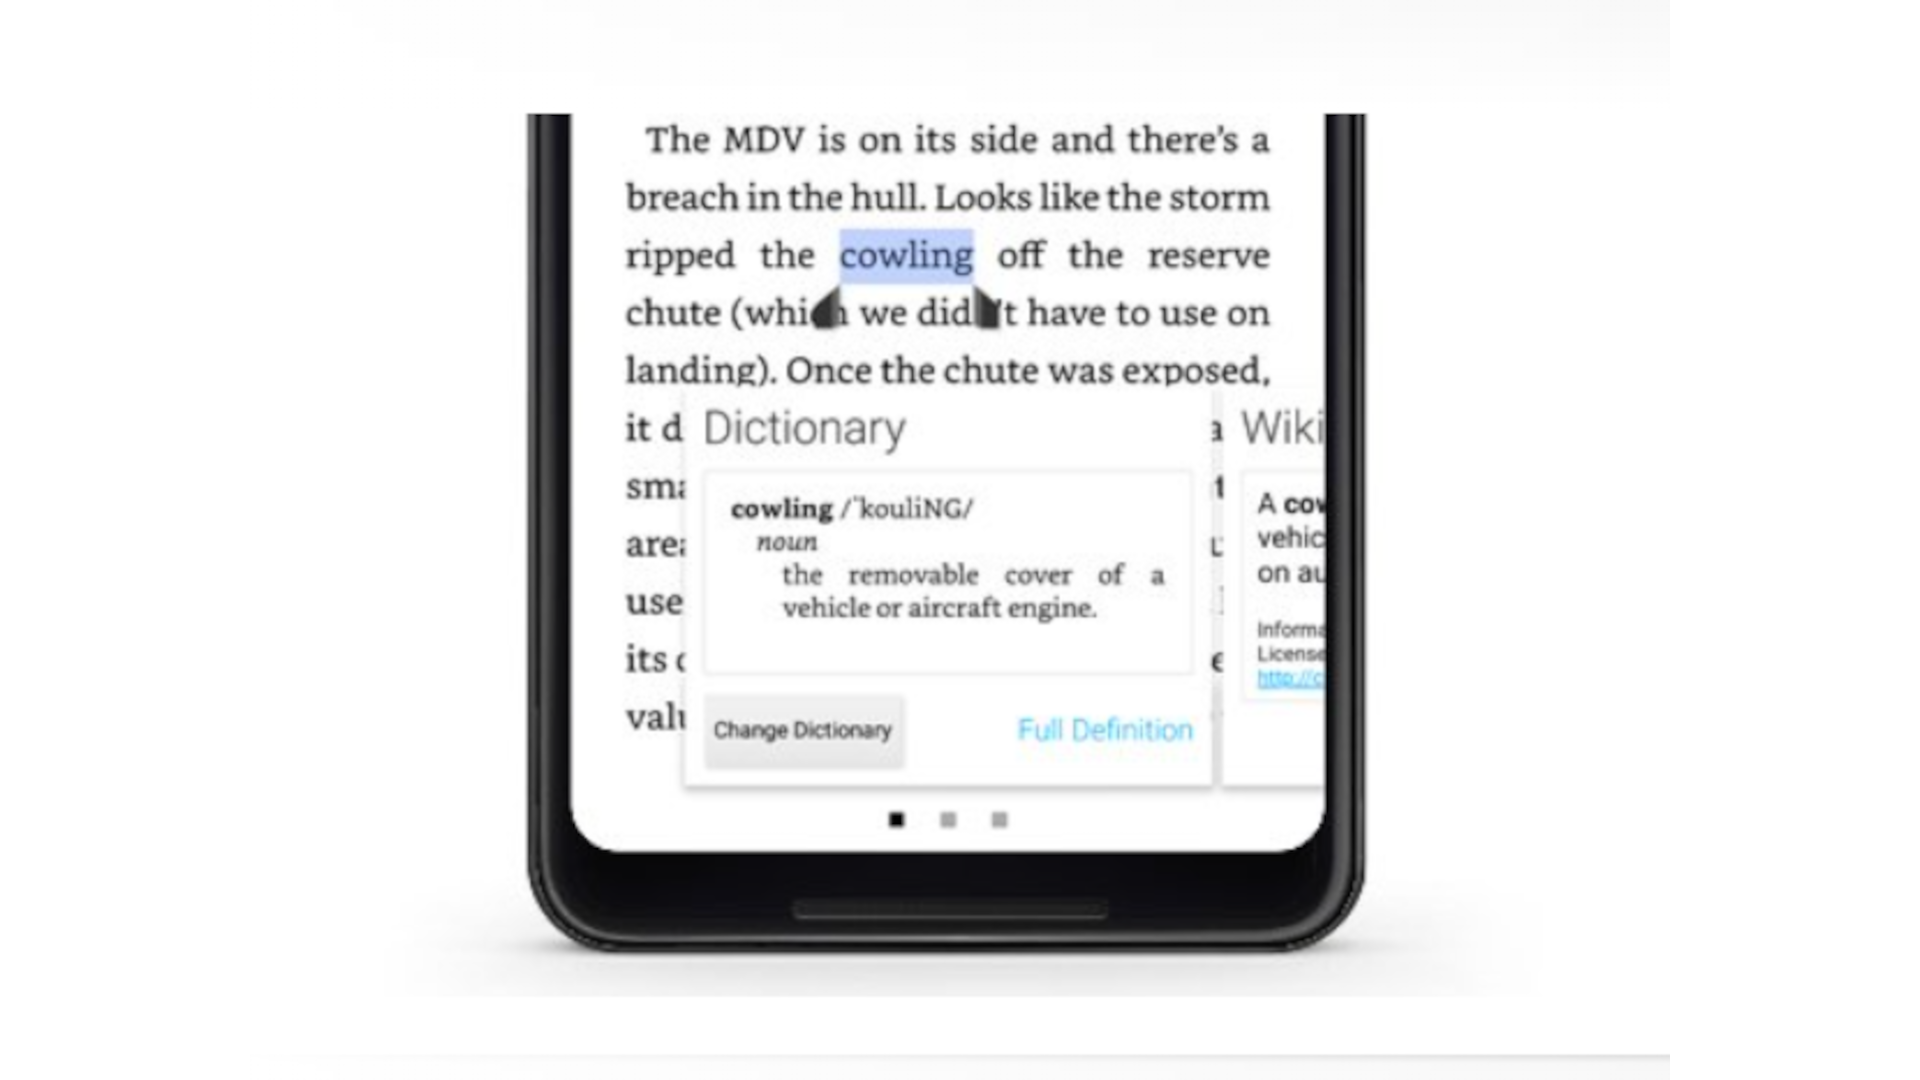 A screenshot shows how to use the Kindle dictionary.